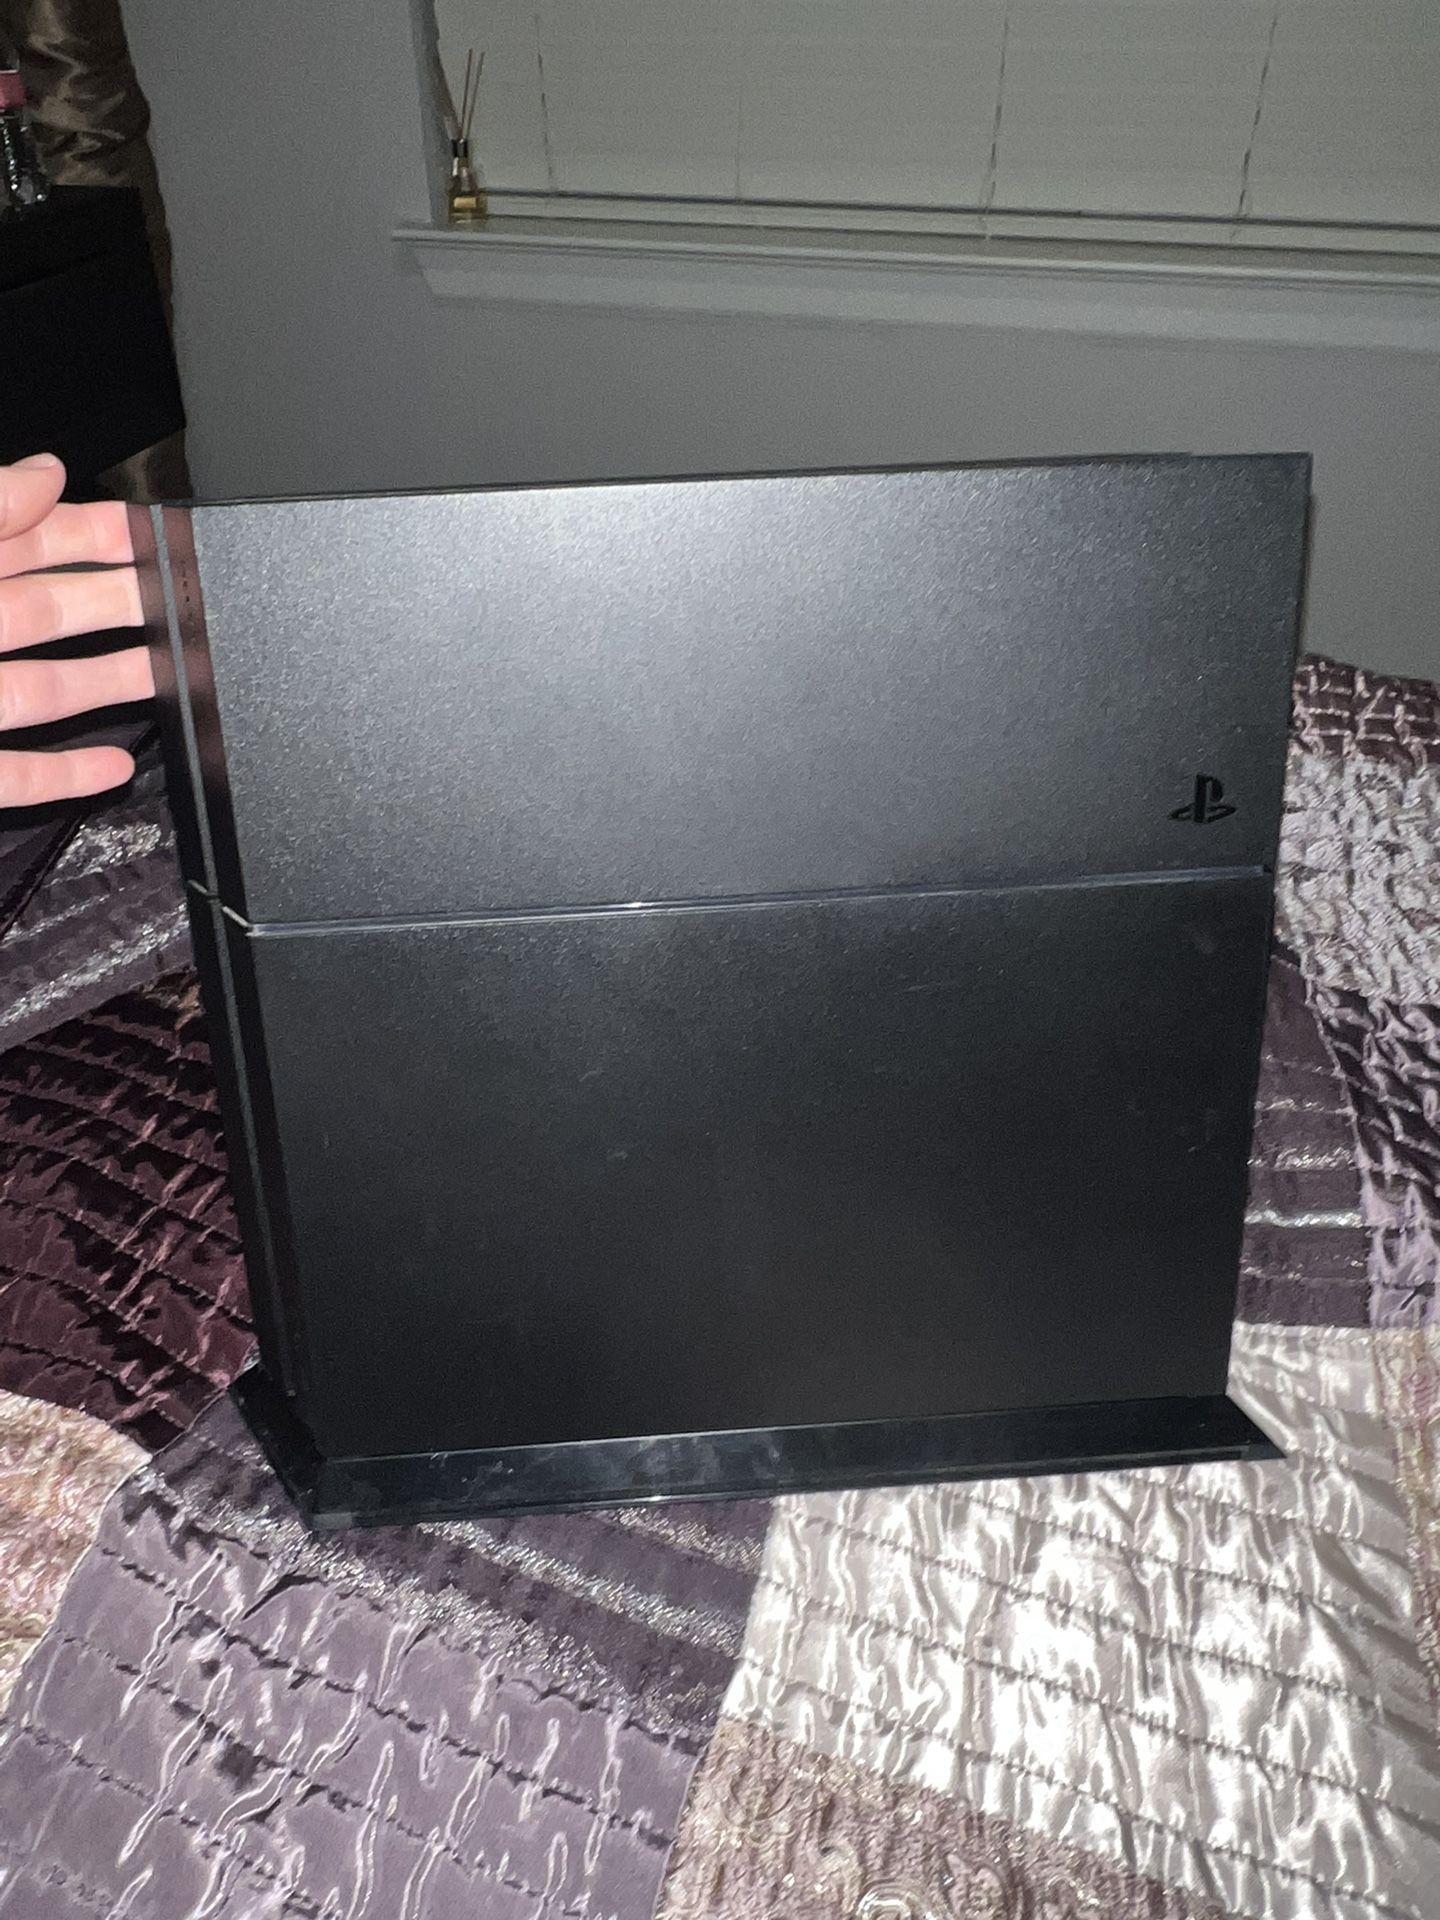 PS4 ORIGINAL BUNDLE WITH GAMES & CONTROLLERS